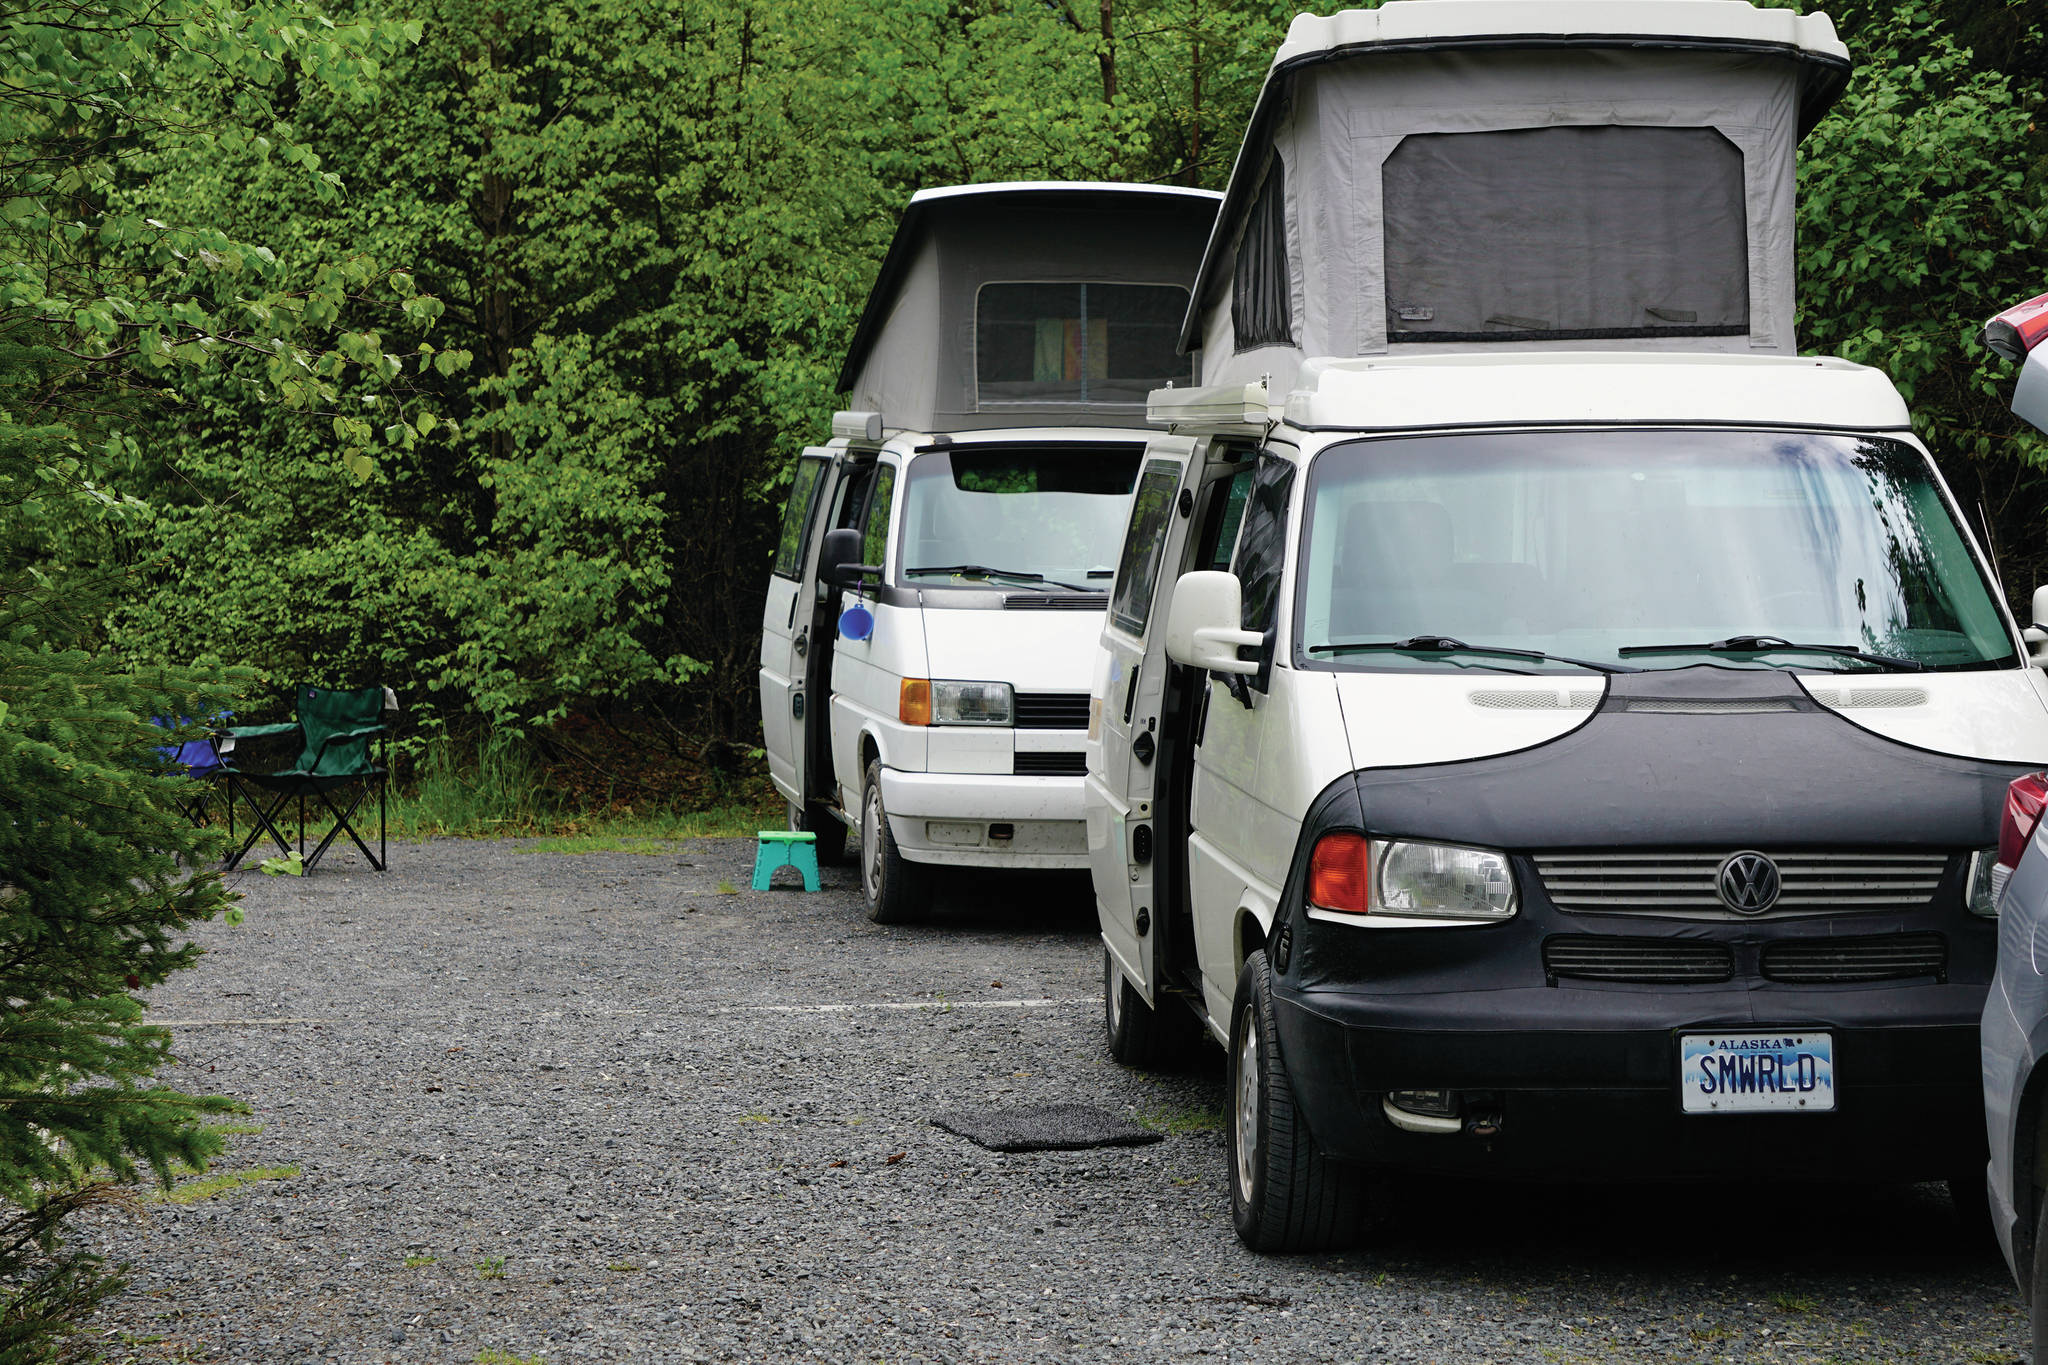 Two vintage VW campers are seen on Thursday, June 10, 2021, at the Trail River Campground near Seward, Alaska. (Photo by Michael Armstrong/Homer News)